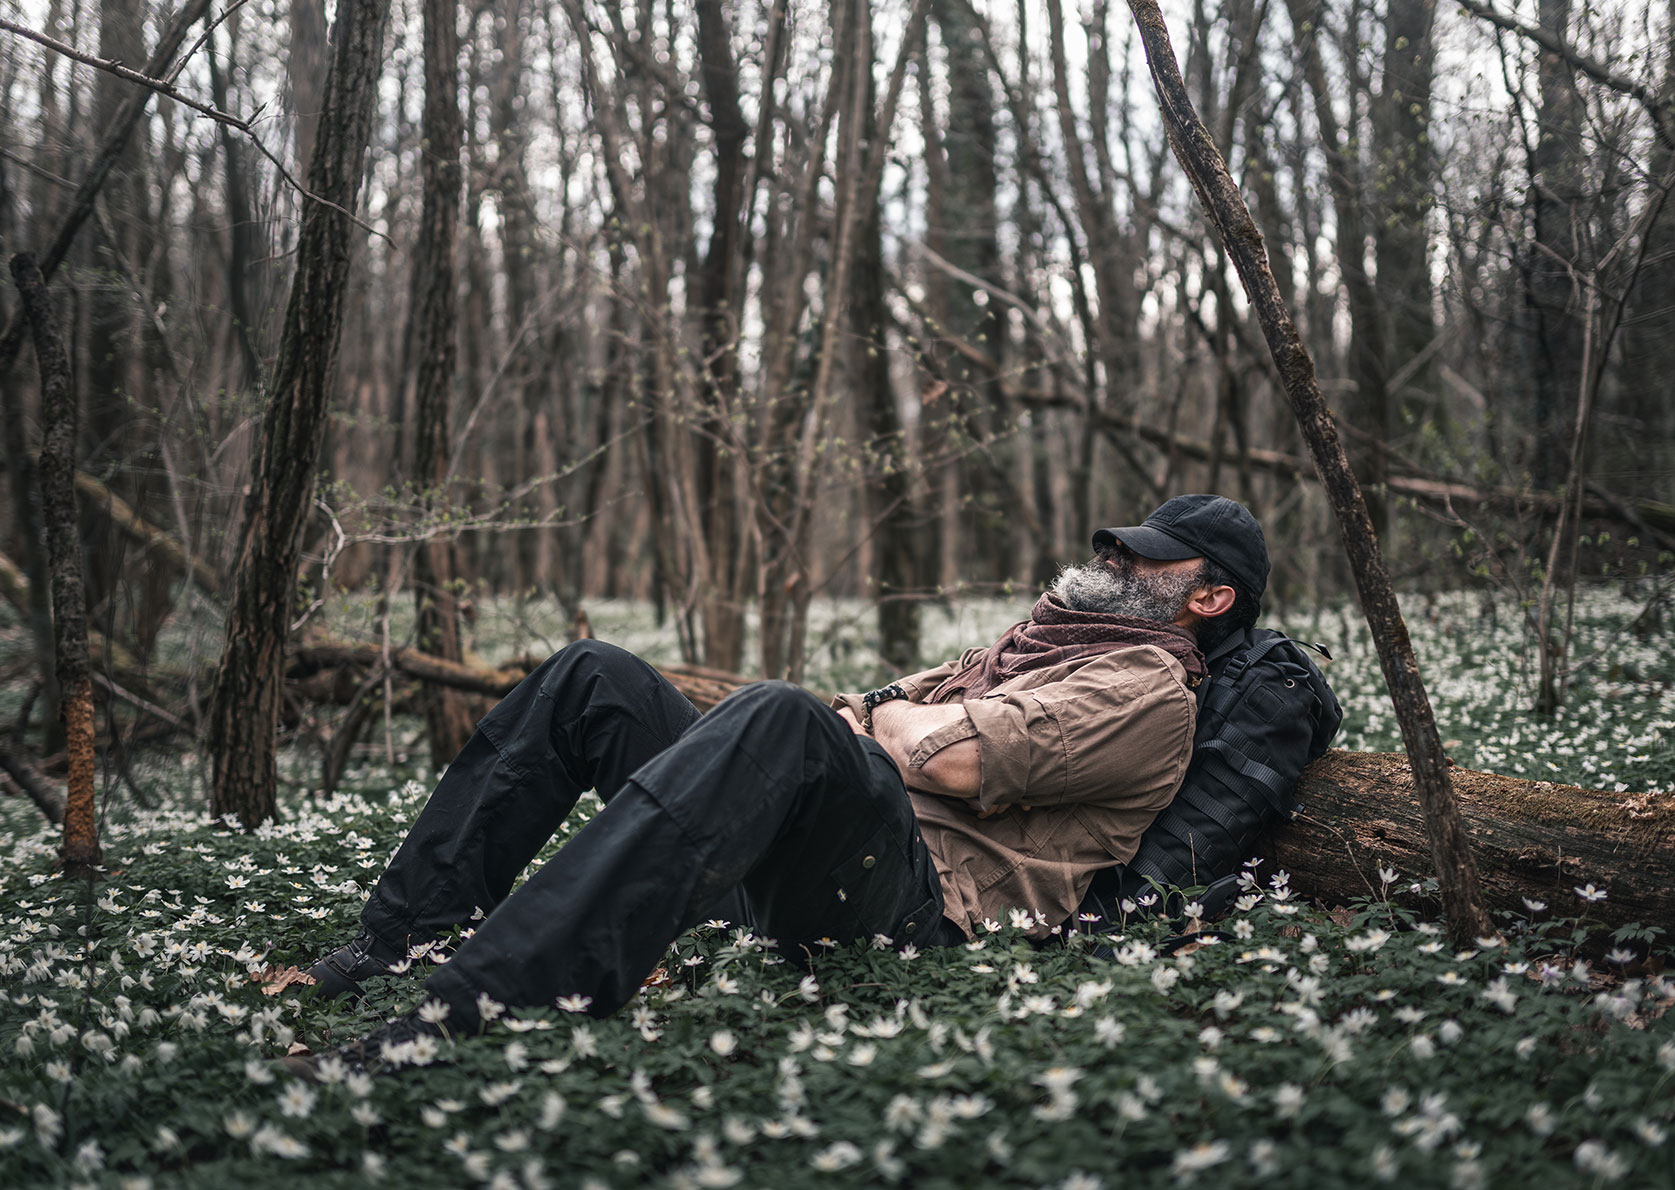 Bushcraft skills expert Alex Wander lying on a carpet of flowers on the forest floor and enjoying nature demonstrating bushcraft meaning